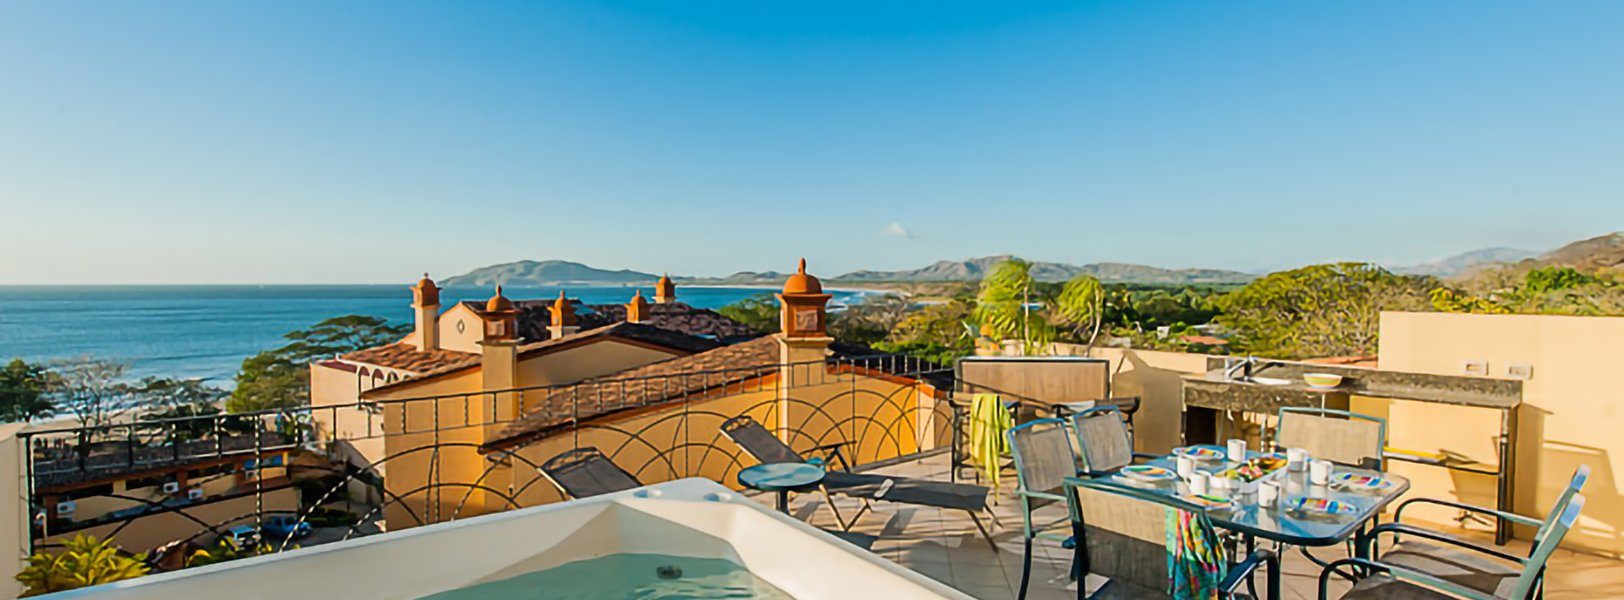 Breathtaking panoramic views from your very own rooftop hot tub in Tamarindo!